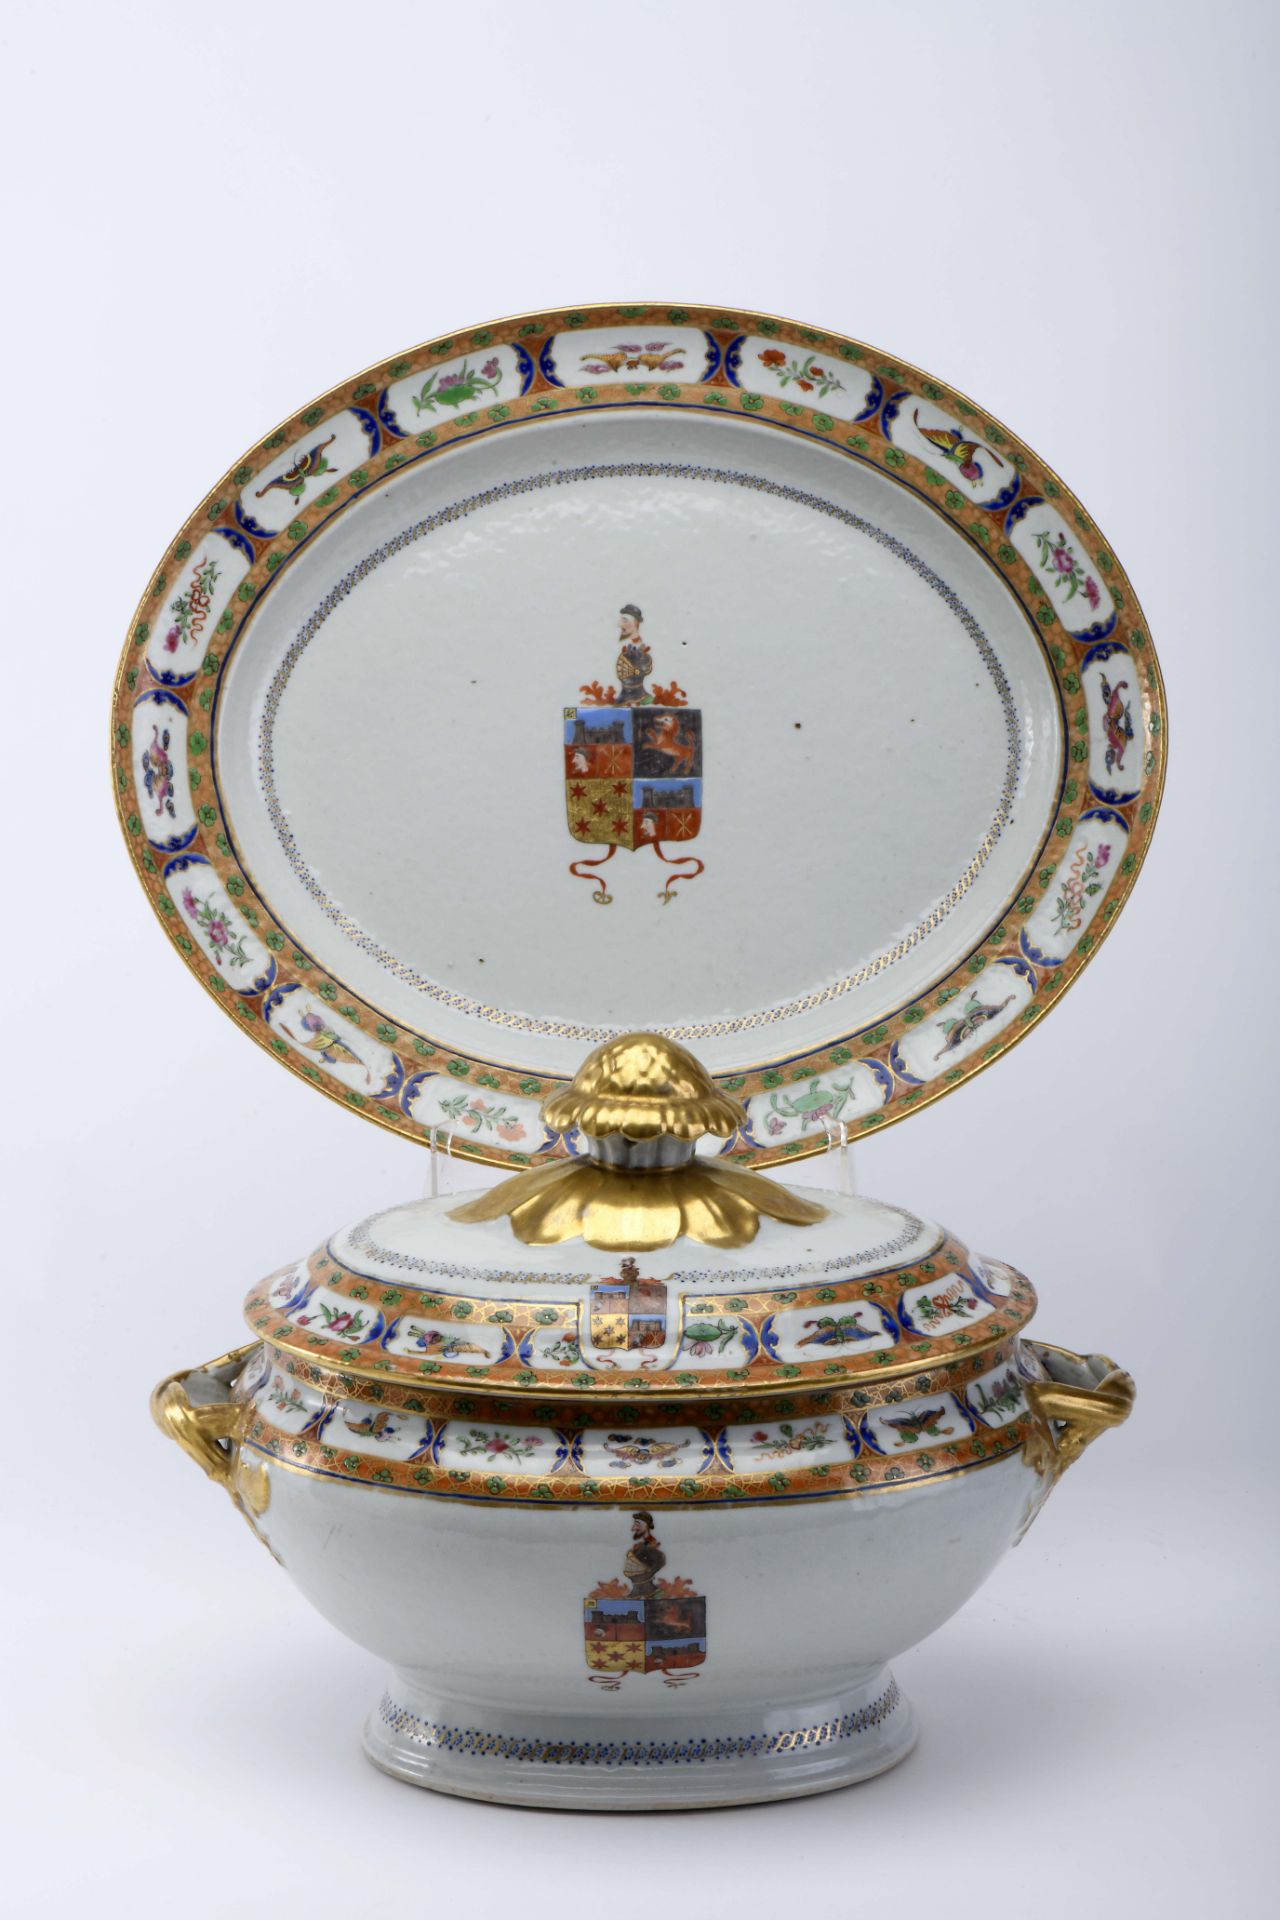 An oval tureen with stand